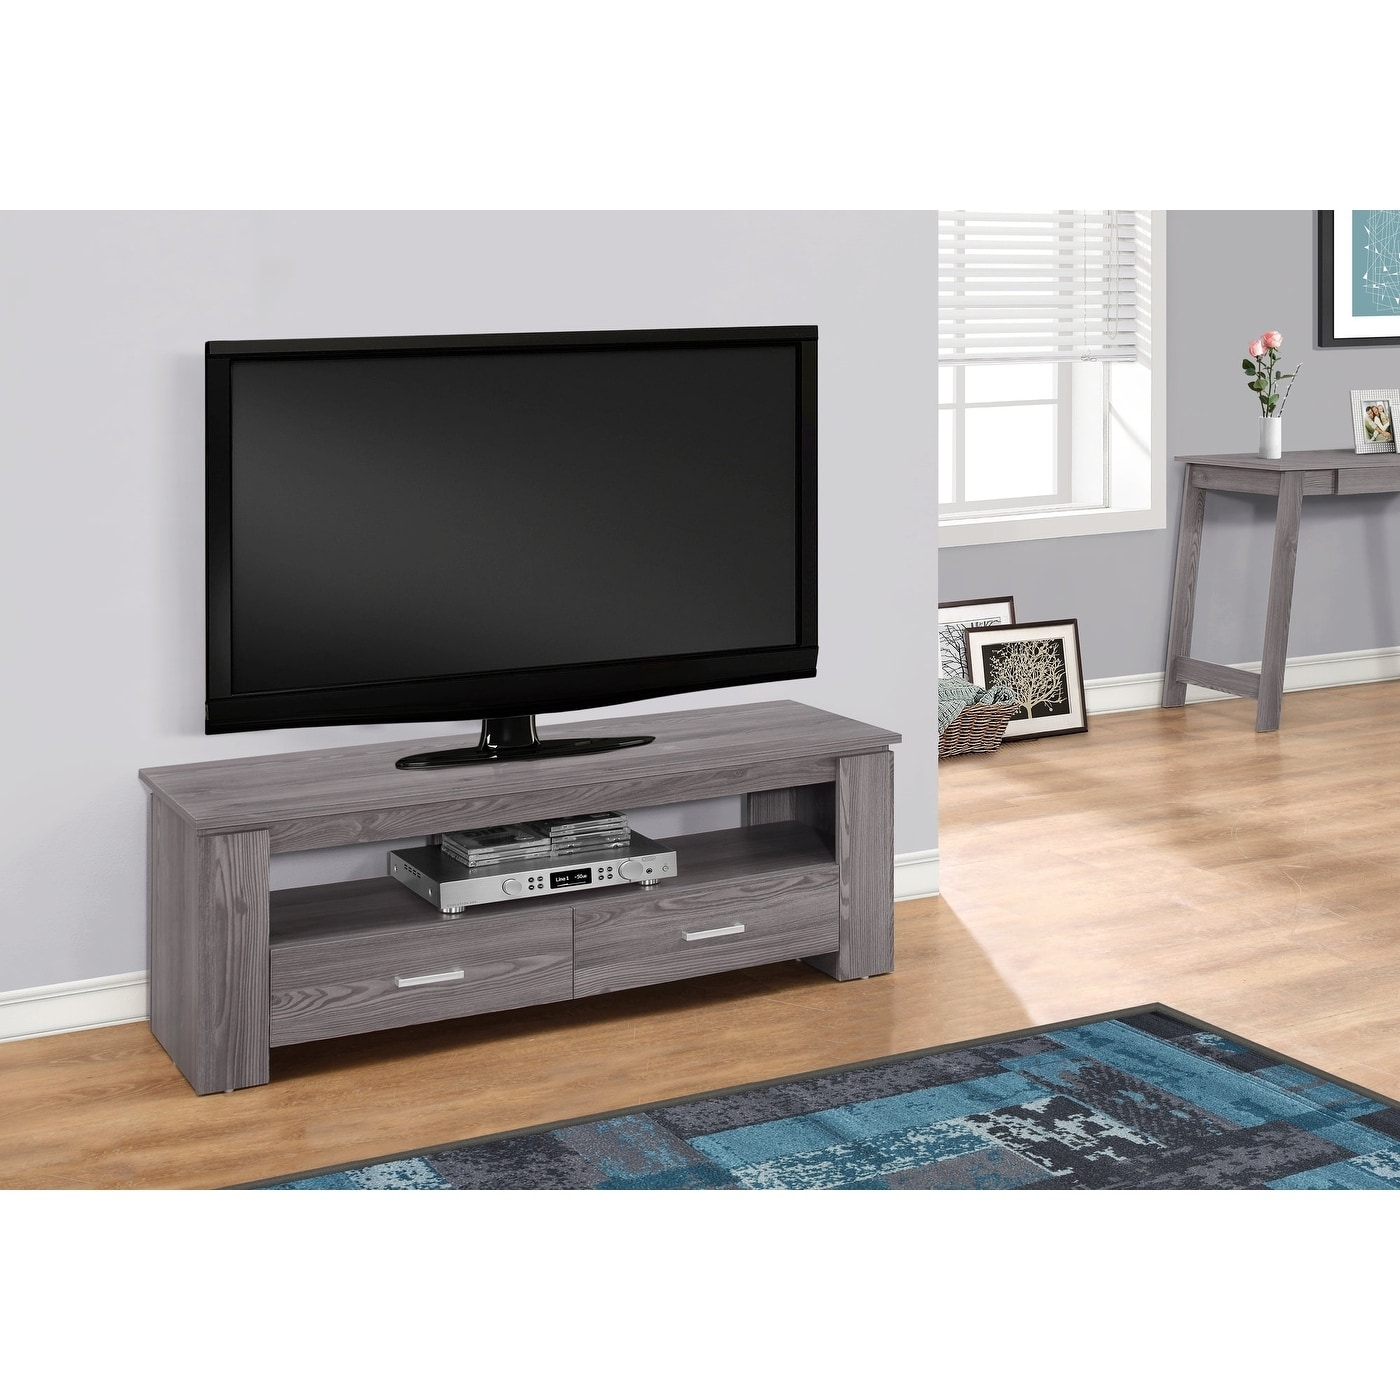 Tv Stand  48 Inch  Console  Media Entertainment Center  Storage Drawers  Living Room  Bedroom  Laminate  Contemporary